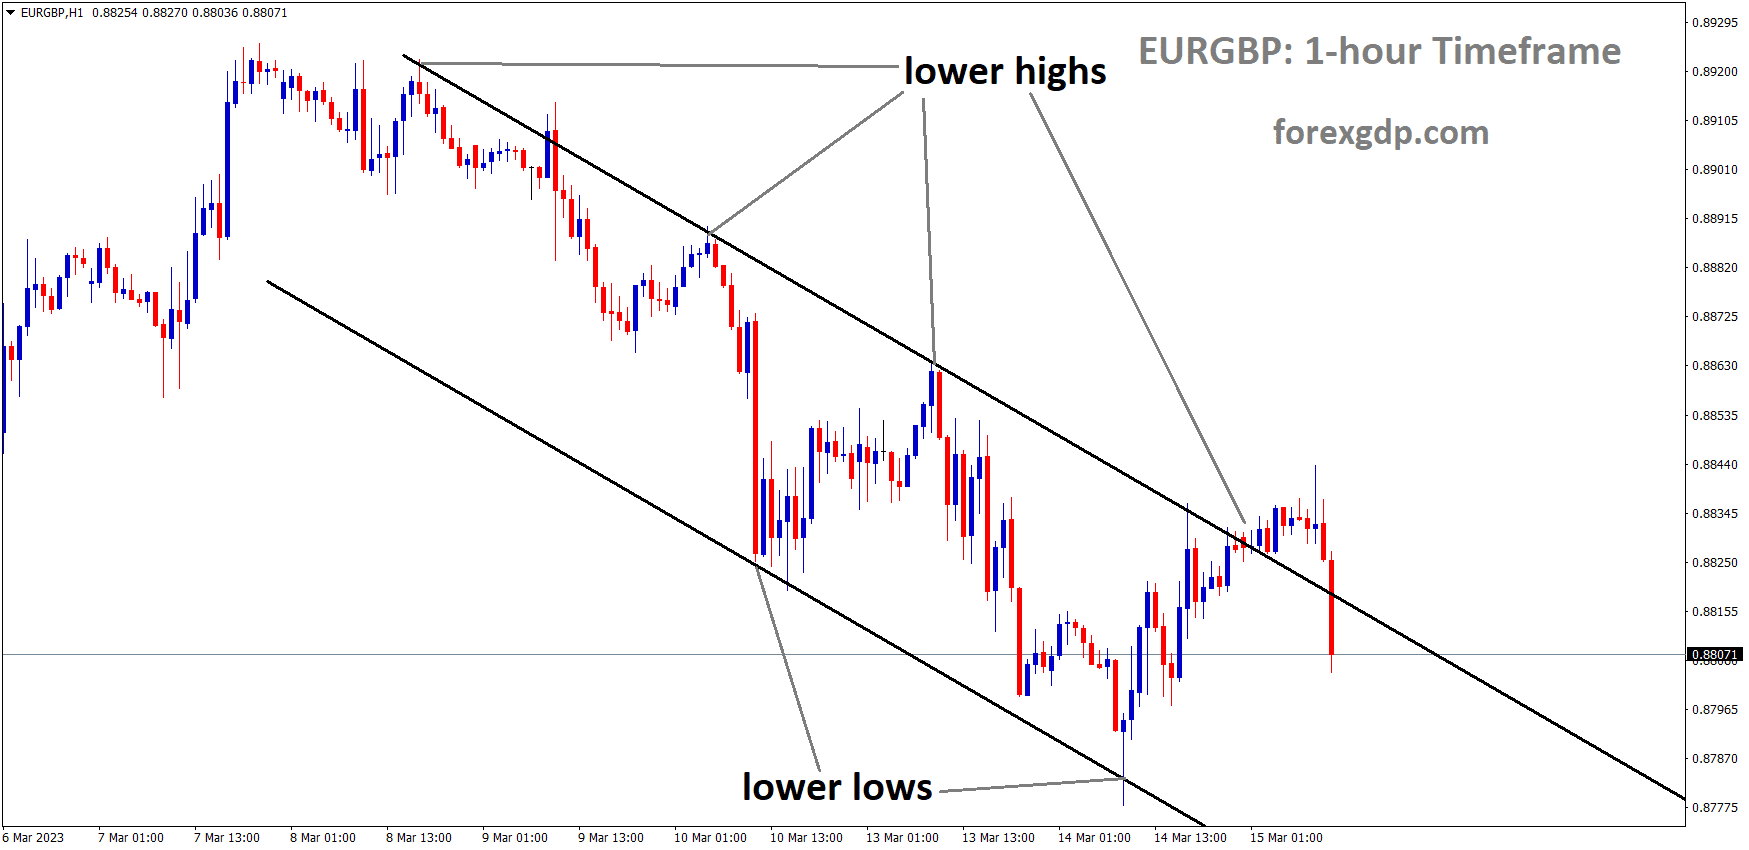 EURGBP is moving in the Descending channel and the market has fallen from the lower high area of the channel